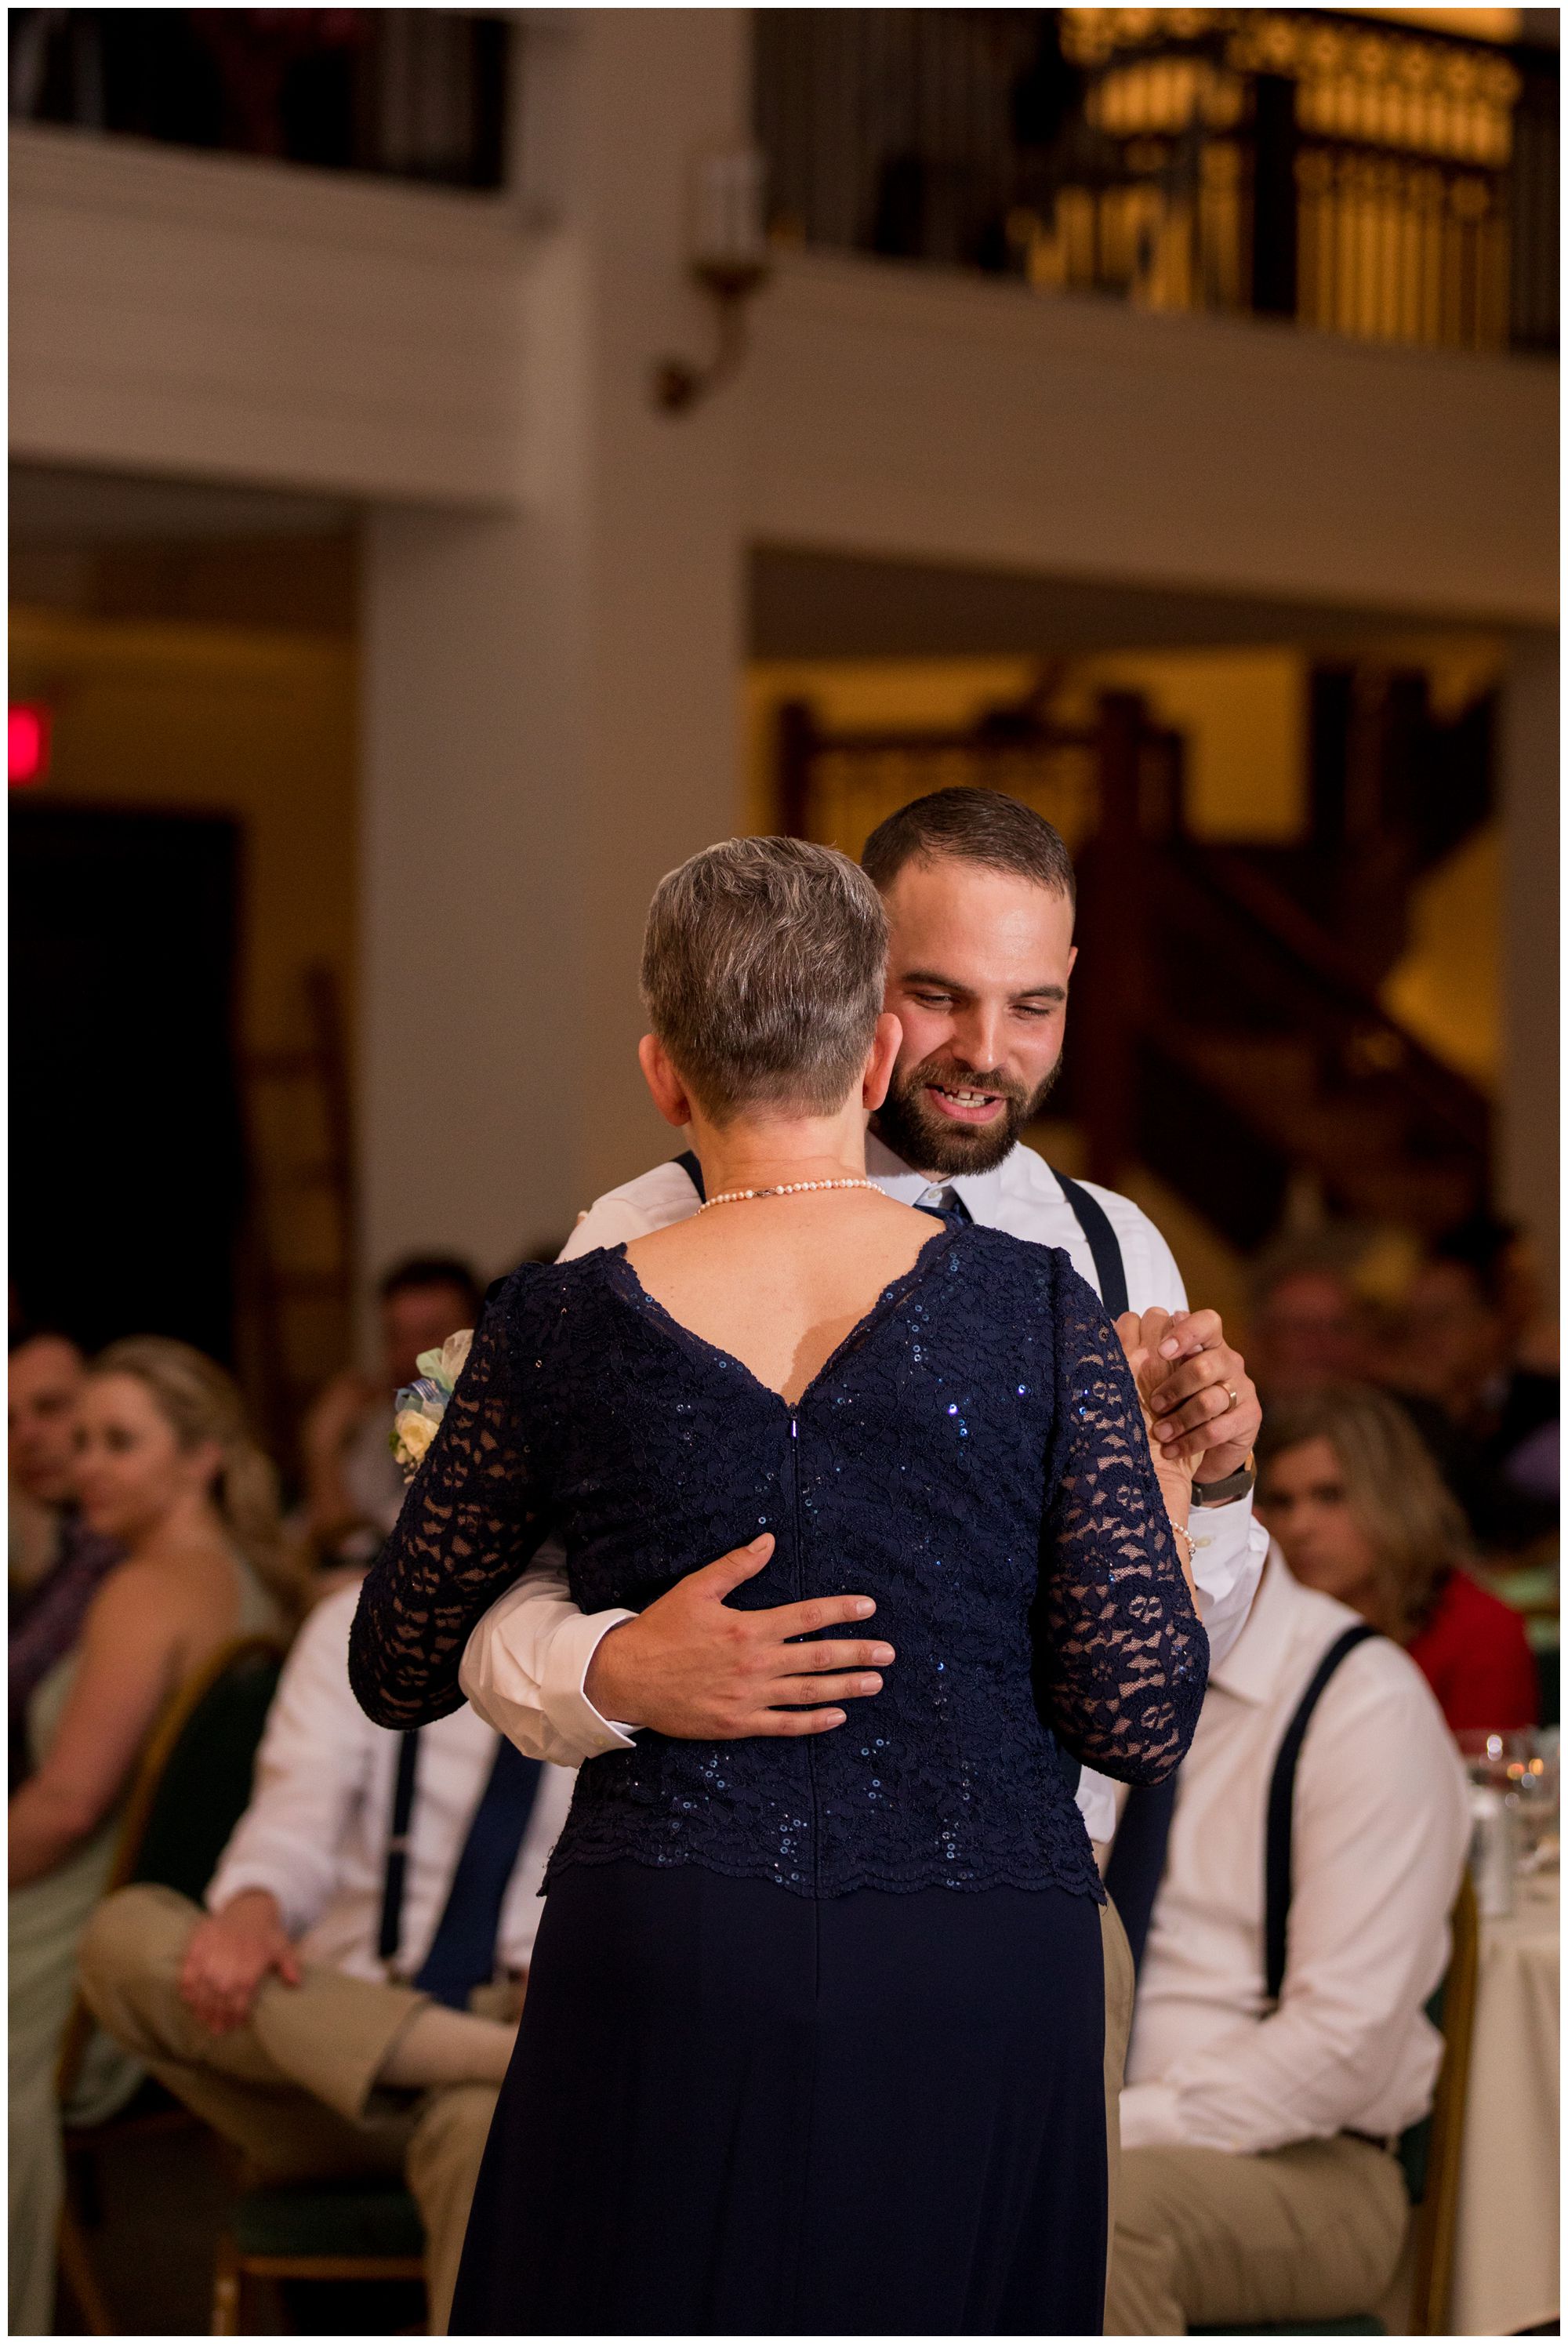 groom and mom dance together at Cornerstone Center for the Arts Muncie Indiana wedding reception